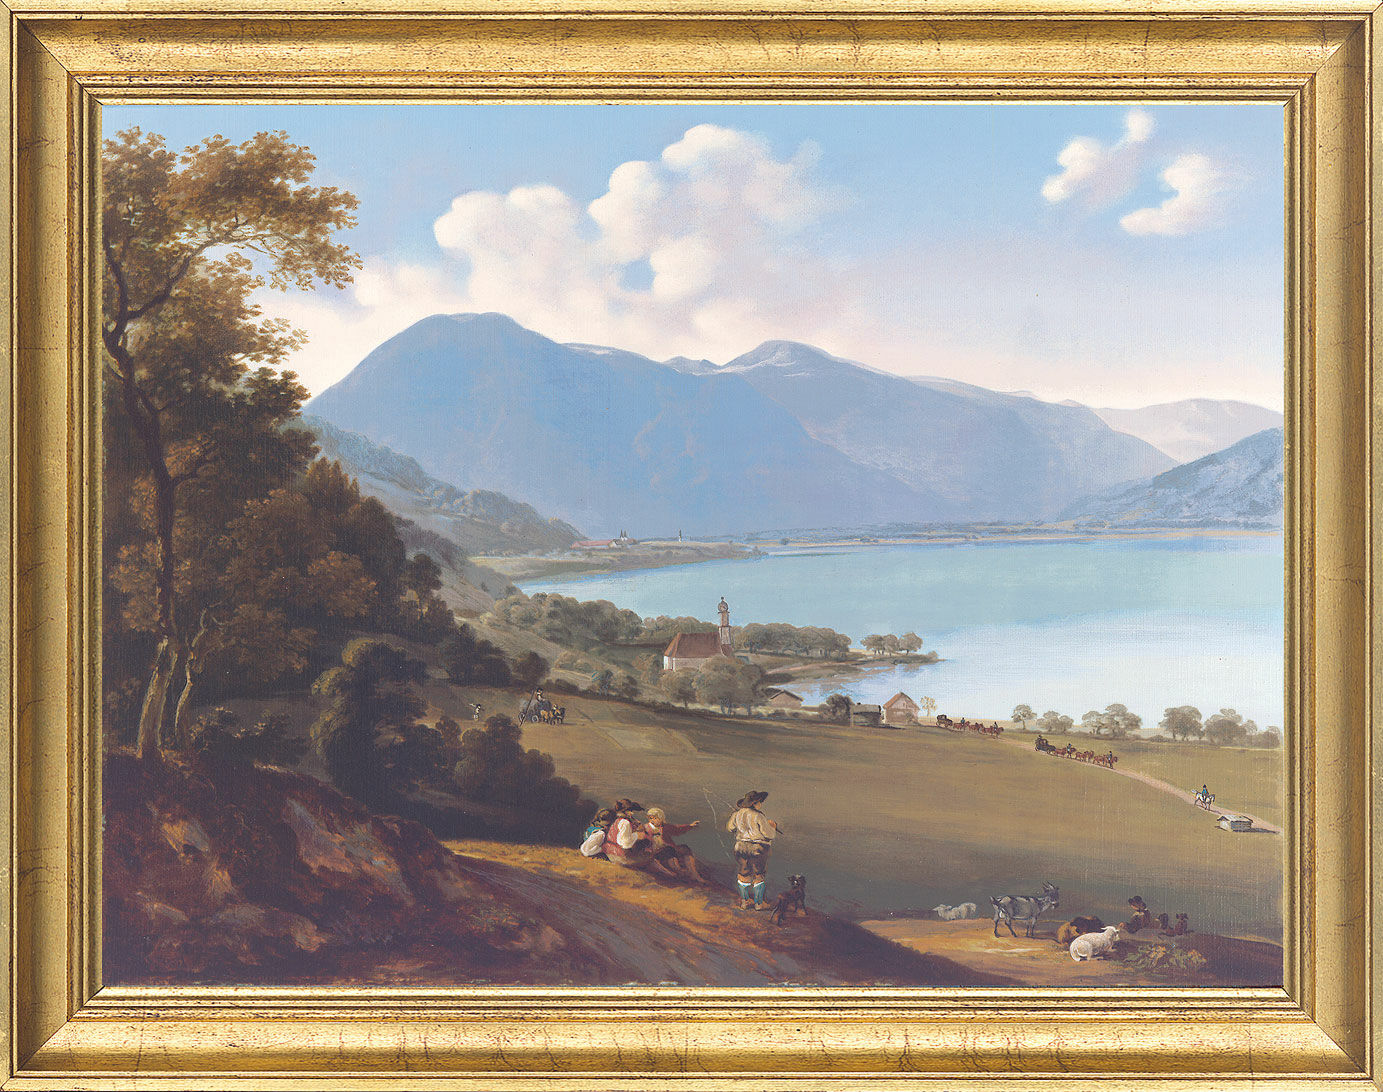 Picture "The Tegernsee", framed by Georg von Dillis